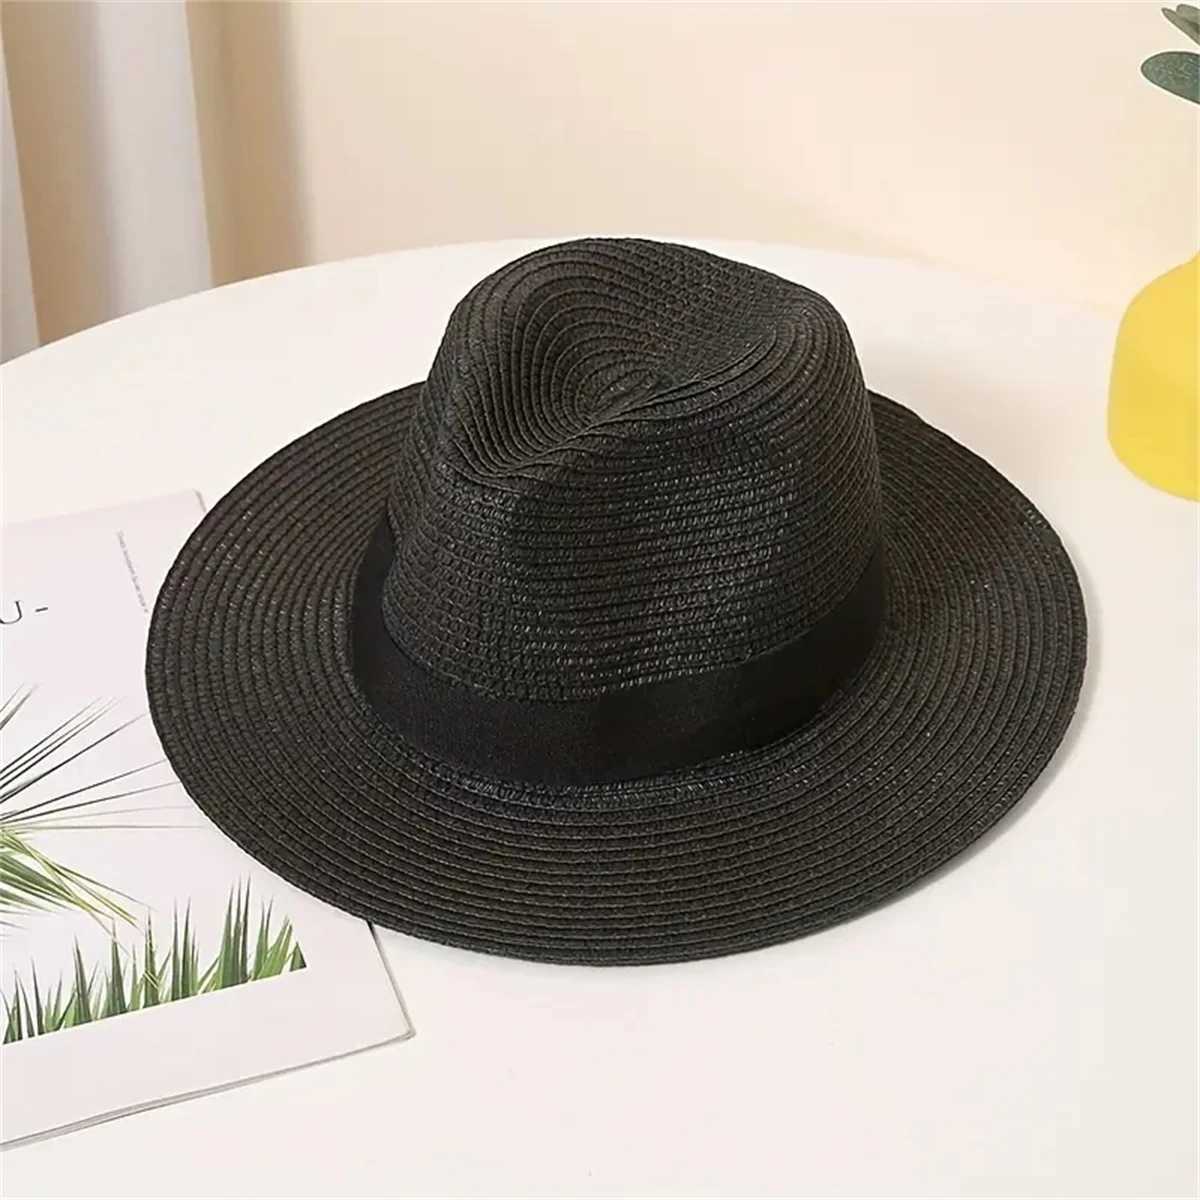 Wide Brim Hats Bucket Hats Classic Unisex Straw Hat Solid Color British Style Panama Hats BreathableSun Hats Outdoor Travel Beach Hat For Women MenL240413